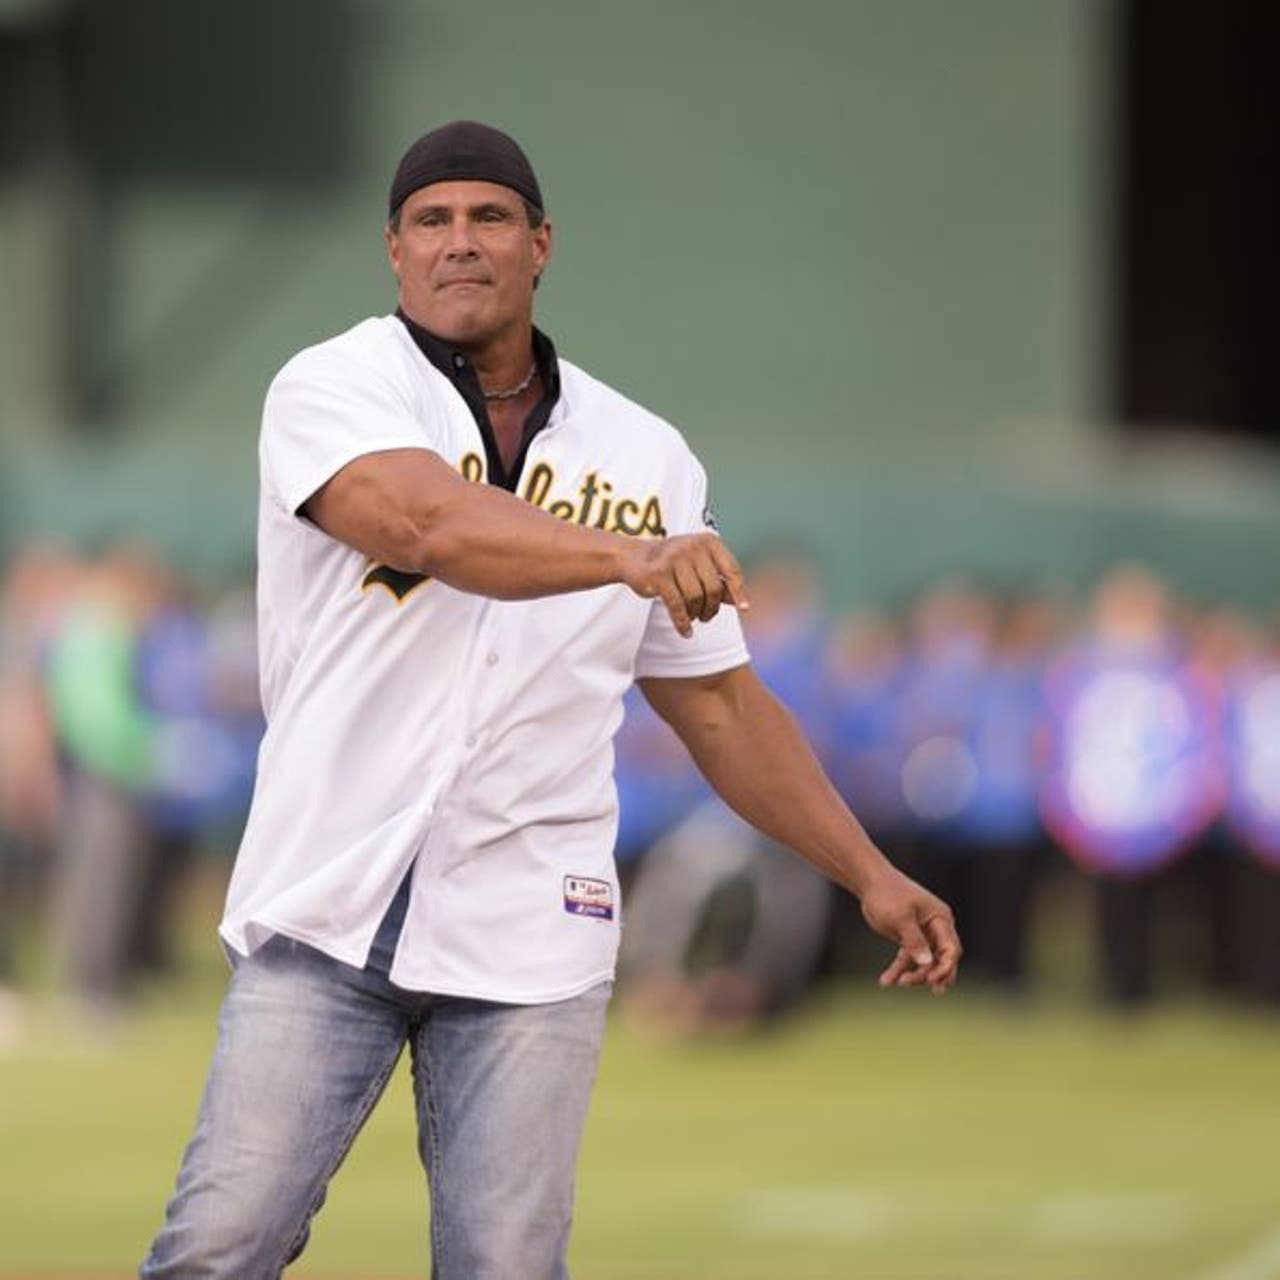 jose canseco –